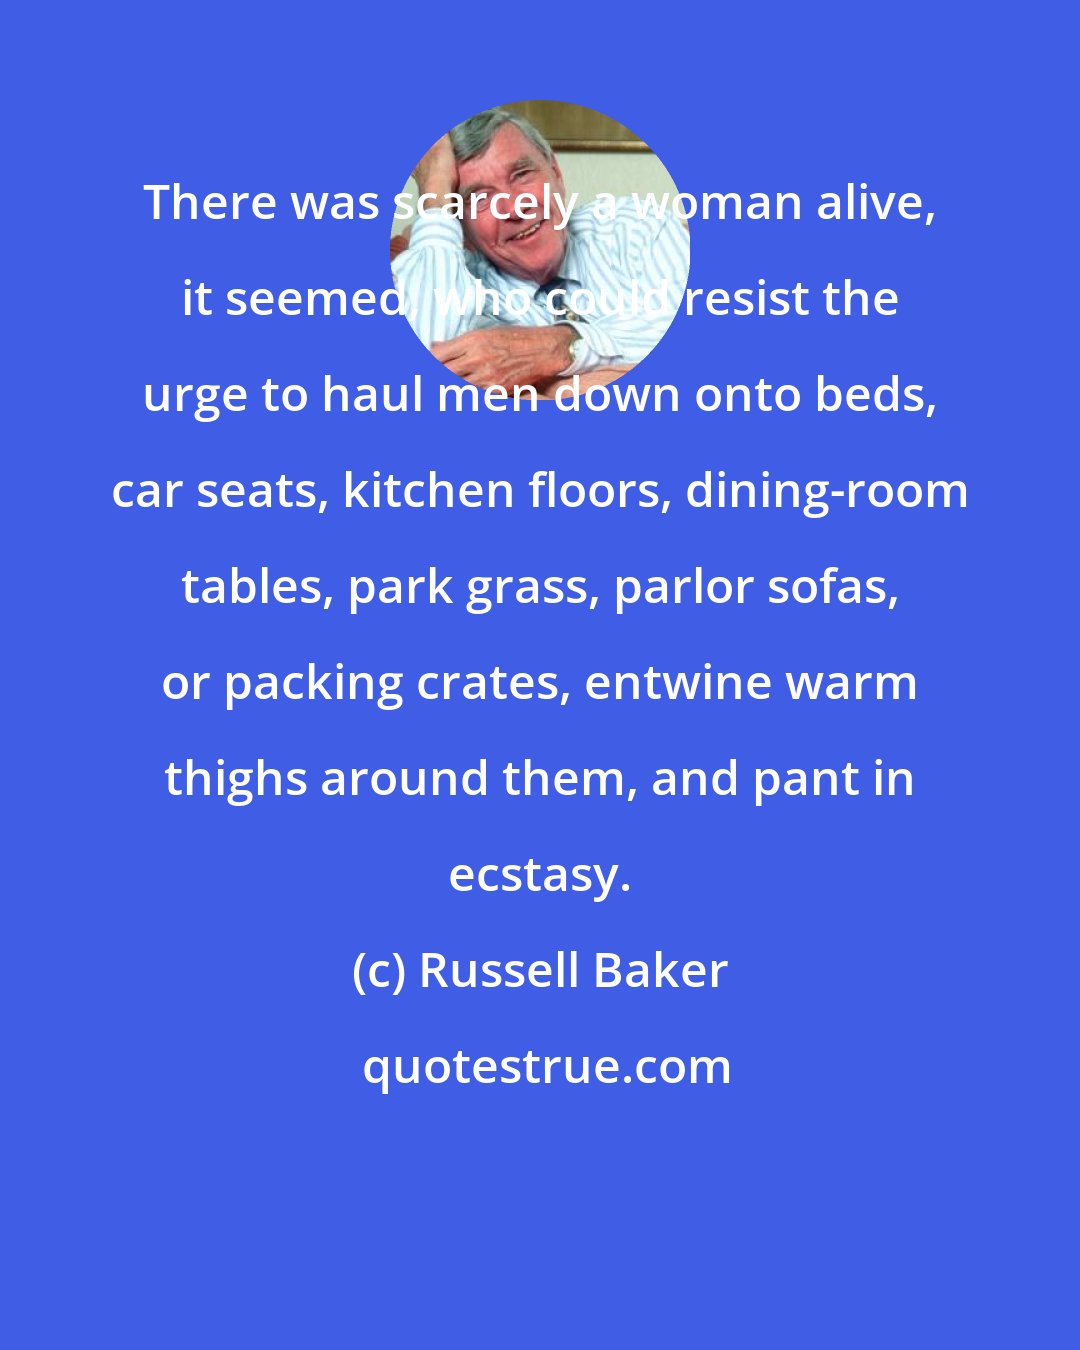 Russell Baker: There was scarcely a woman alive, it seemed, who could resist the urge to haul men down onto beds, car seats, kitchen floors, dining-room tables, park grass, parlor sofas, or packing crates, entwine warm thighs around them, and pant in ecstasy.